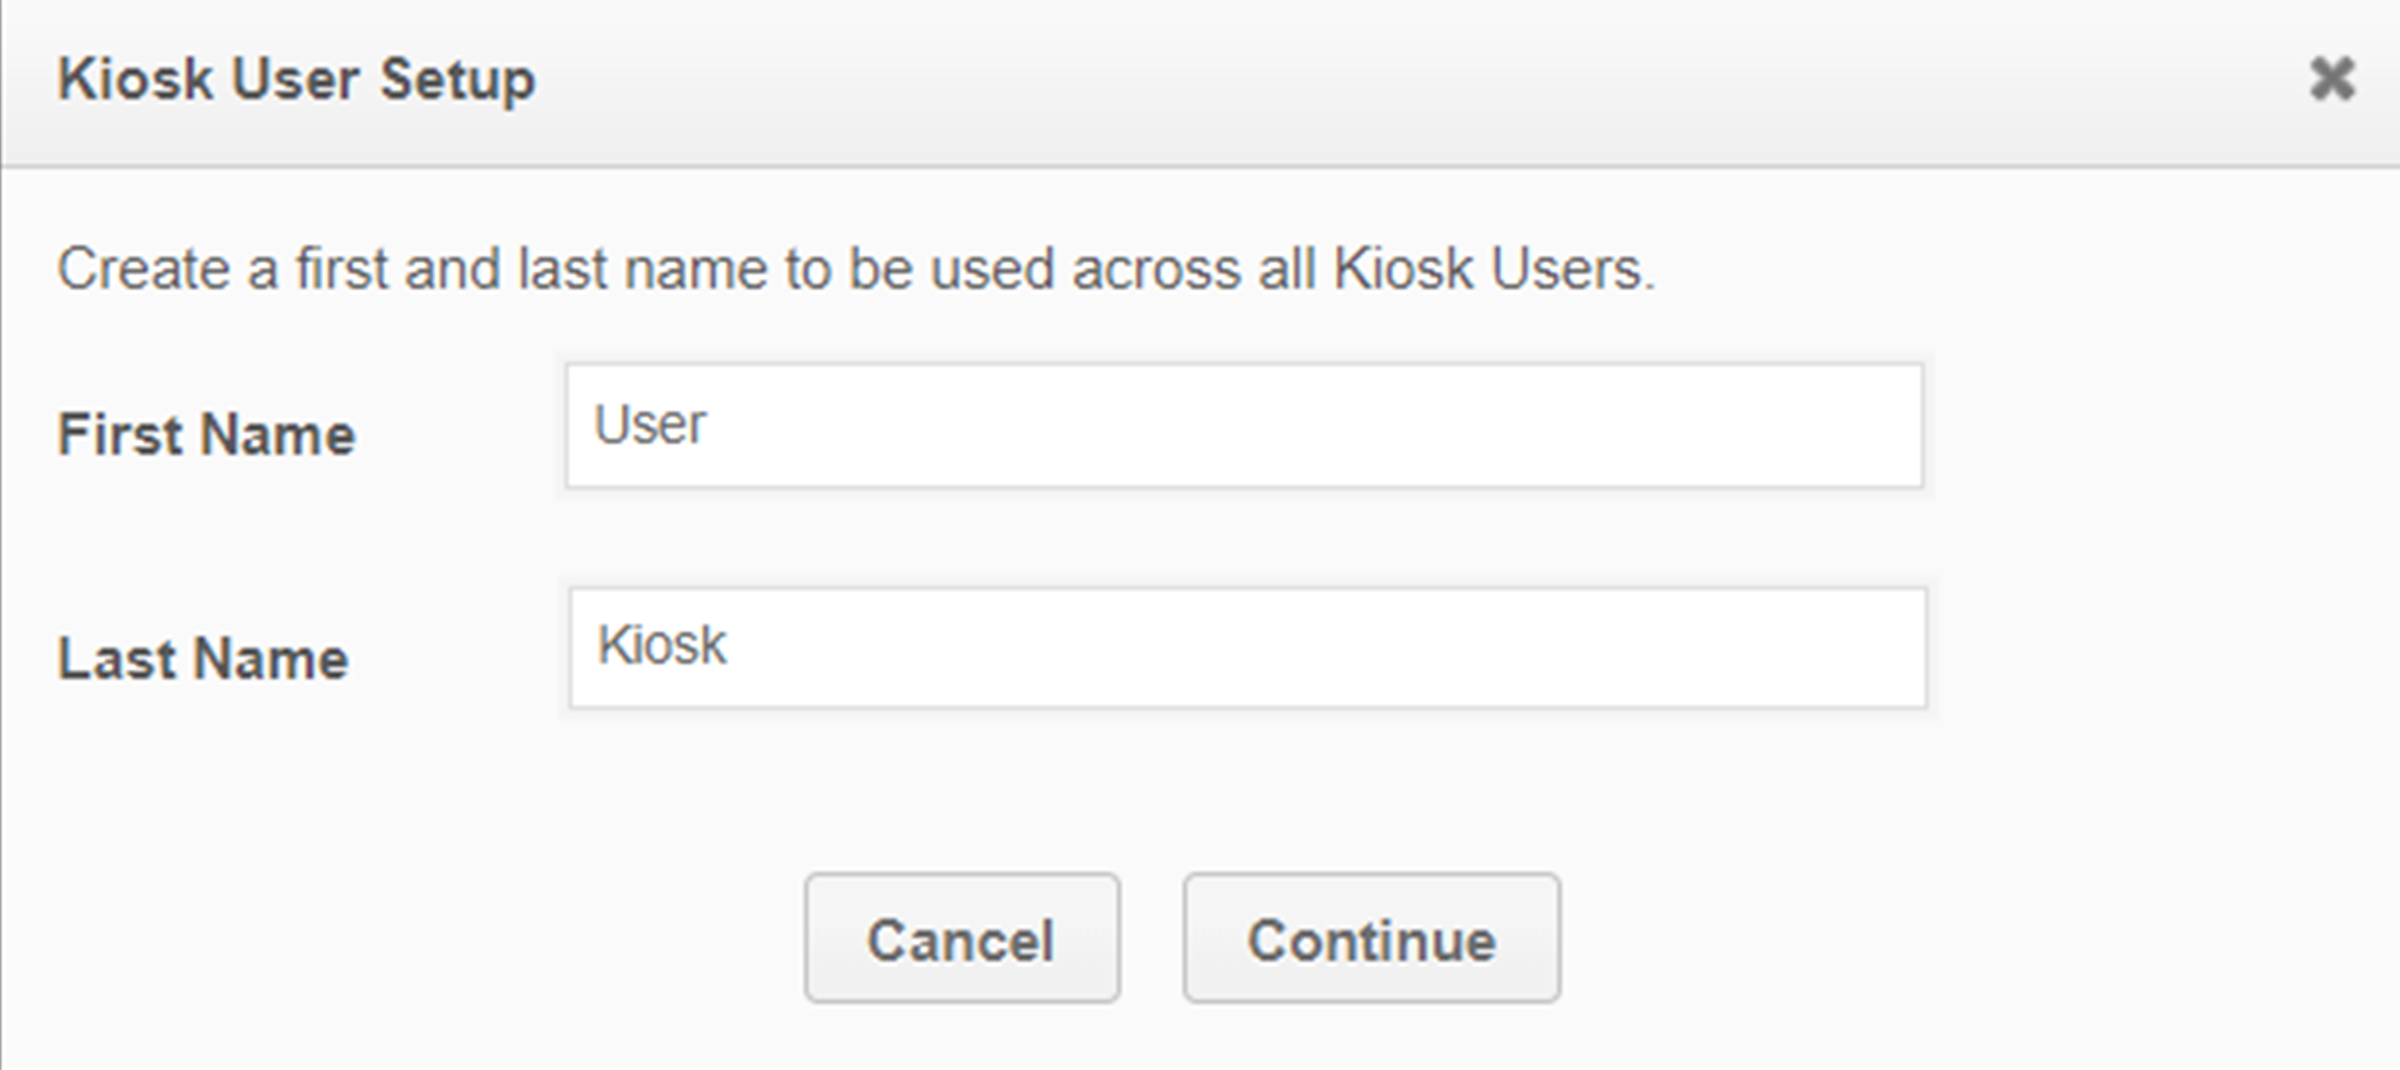 A screenshot of the Kiosk User Setup popup. This screen allows you to enter a first and last name for the kiosk users you are creating.